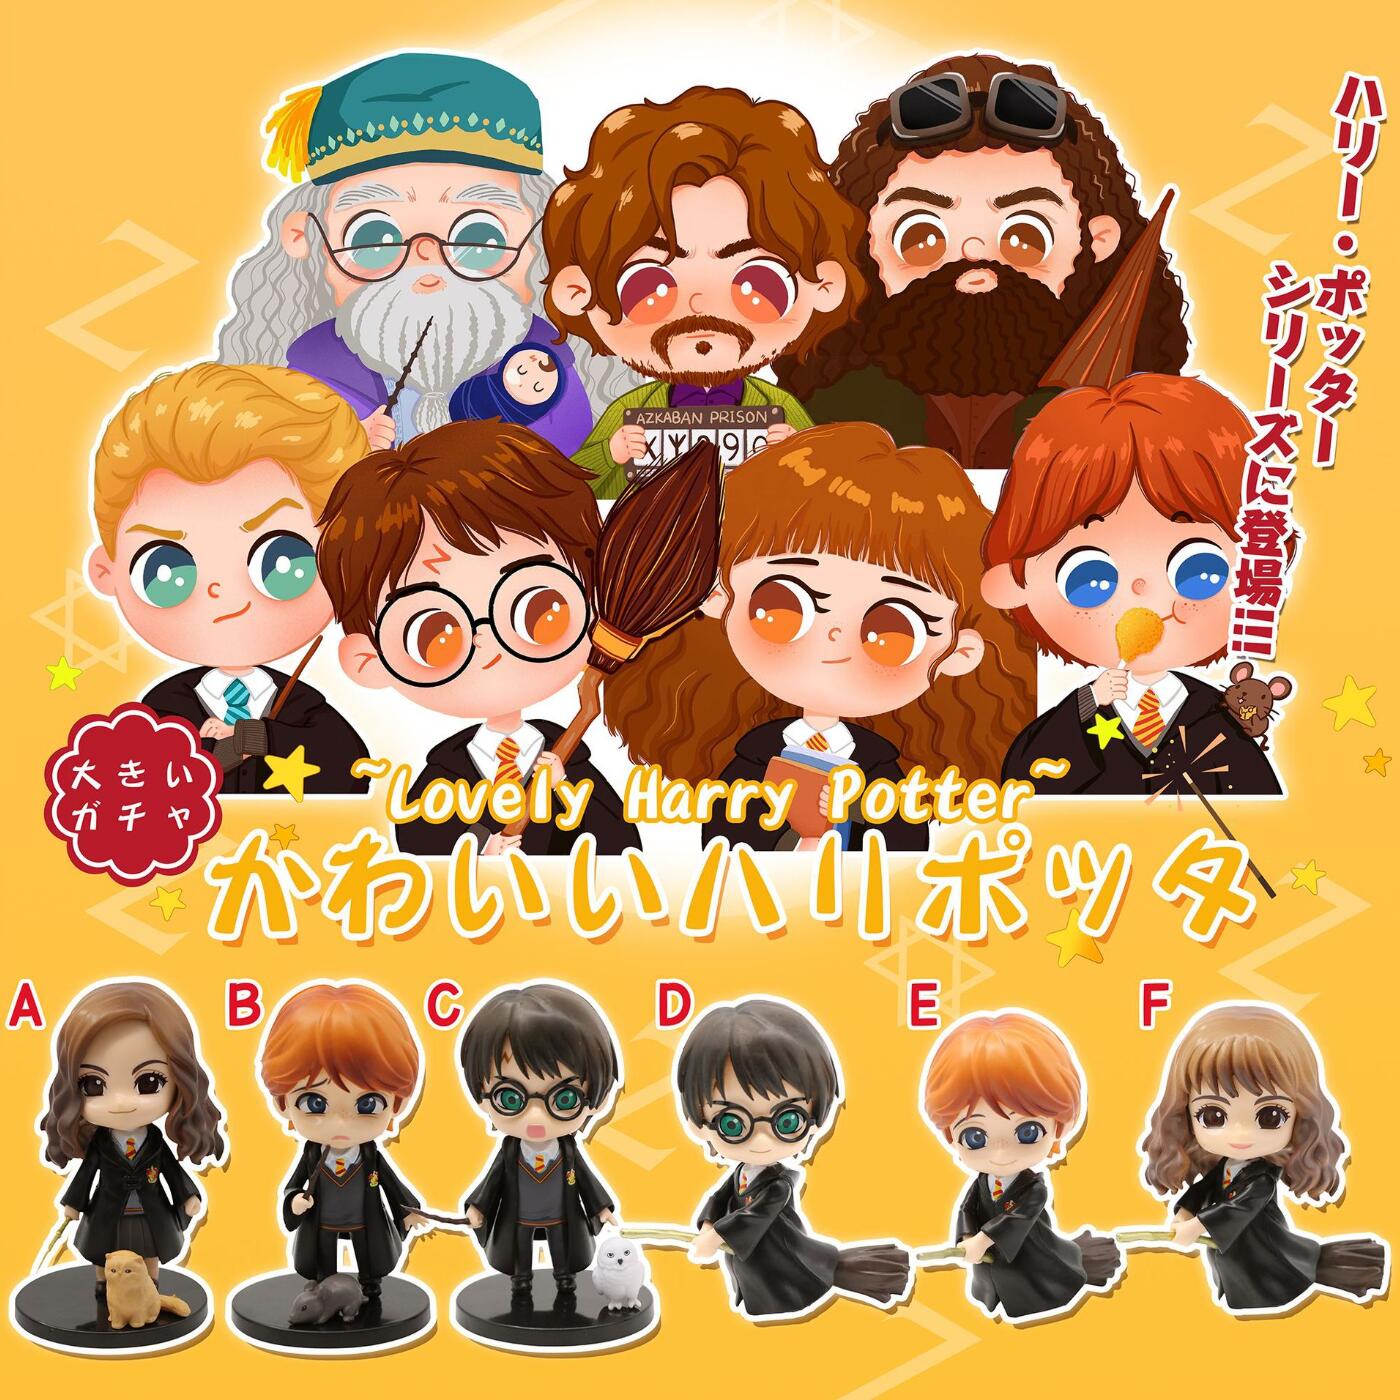 Harry Potter anime figure price for a set of 6 pcs